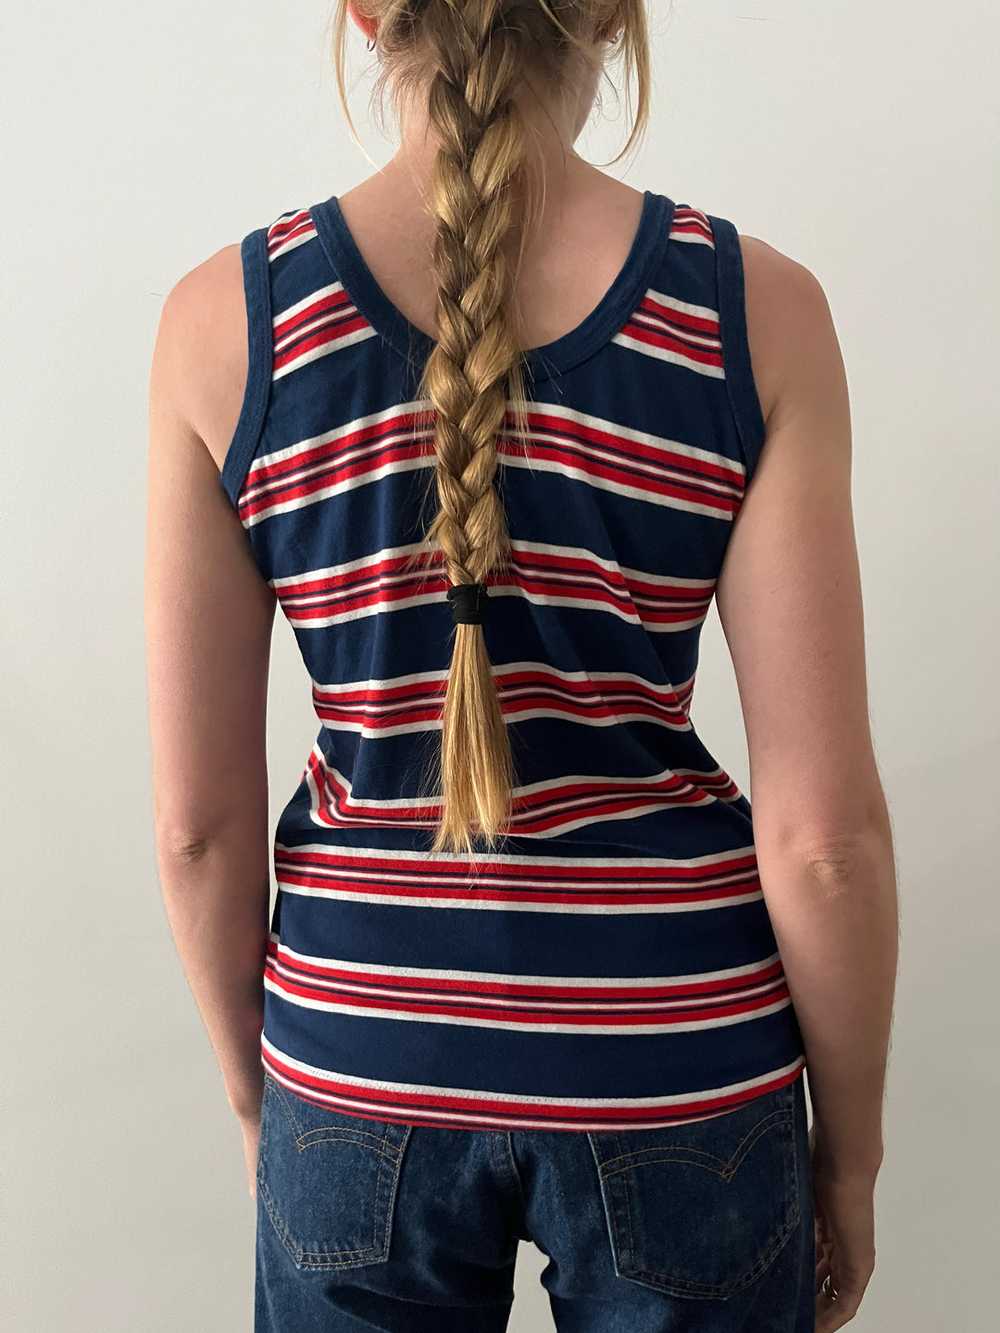 70s Red White & Blue Striped Tank - image 3